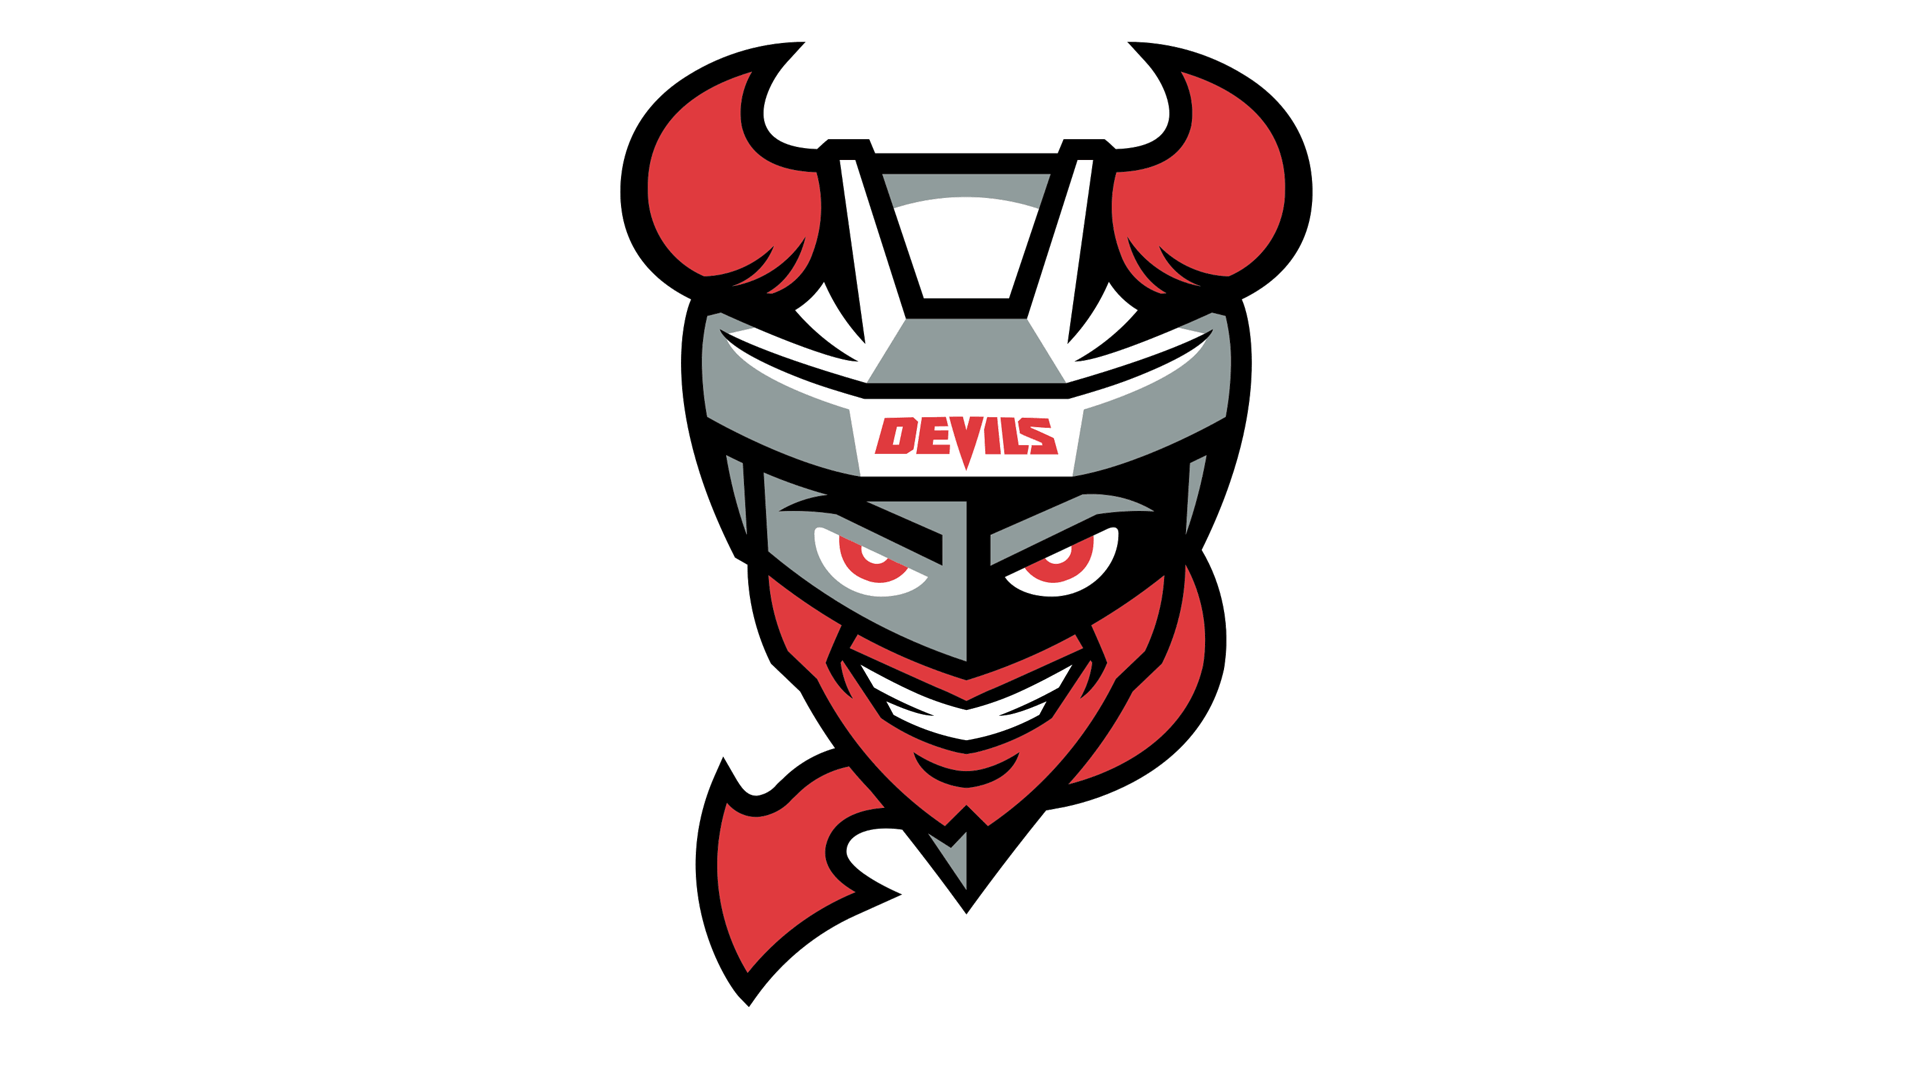 Devils Logo - Binghamton Devils Logo, Binghamton Devils Symbol, Meaning, History